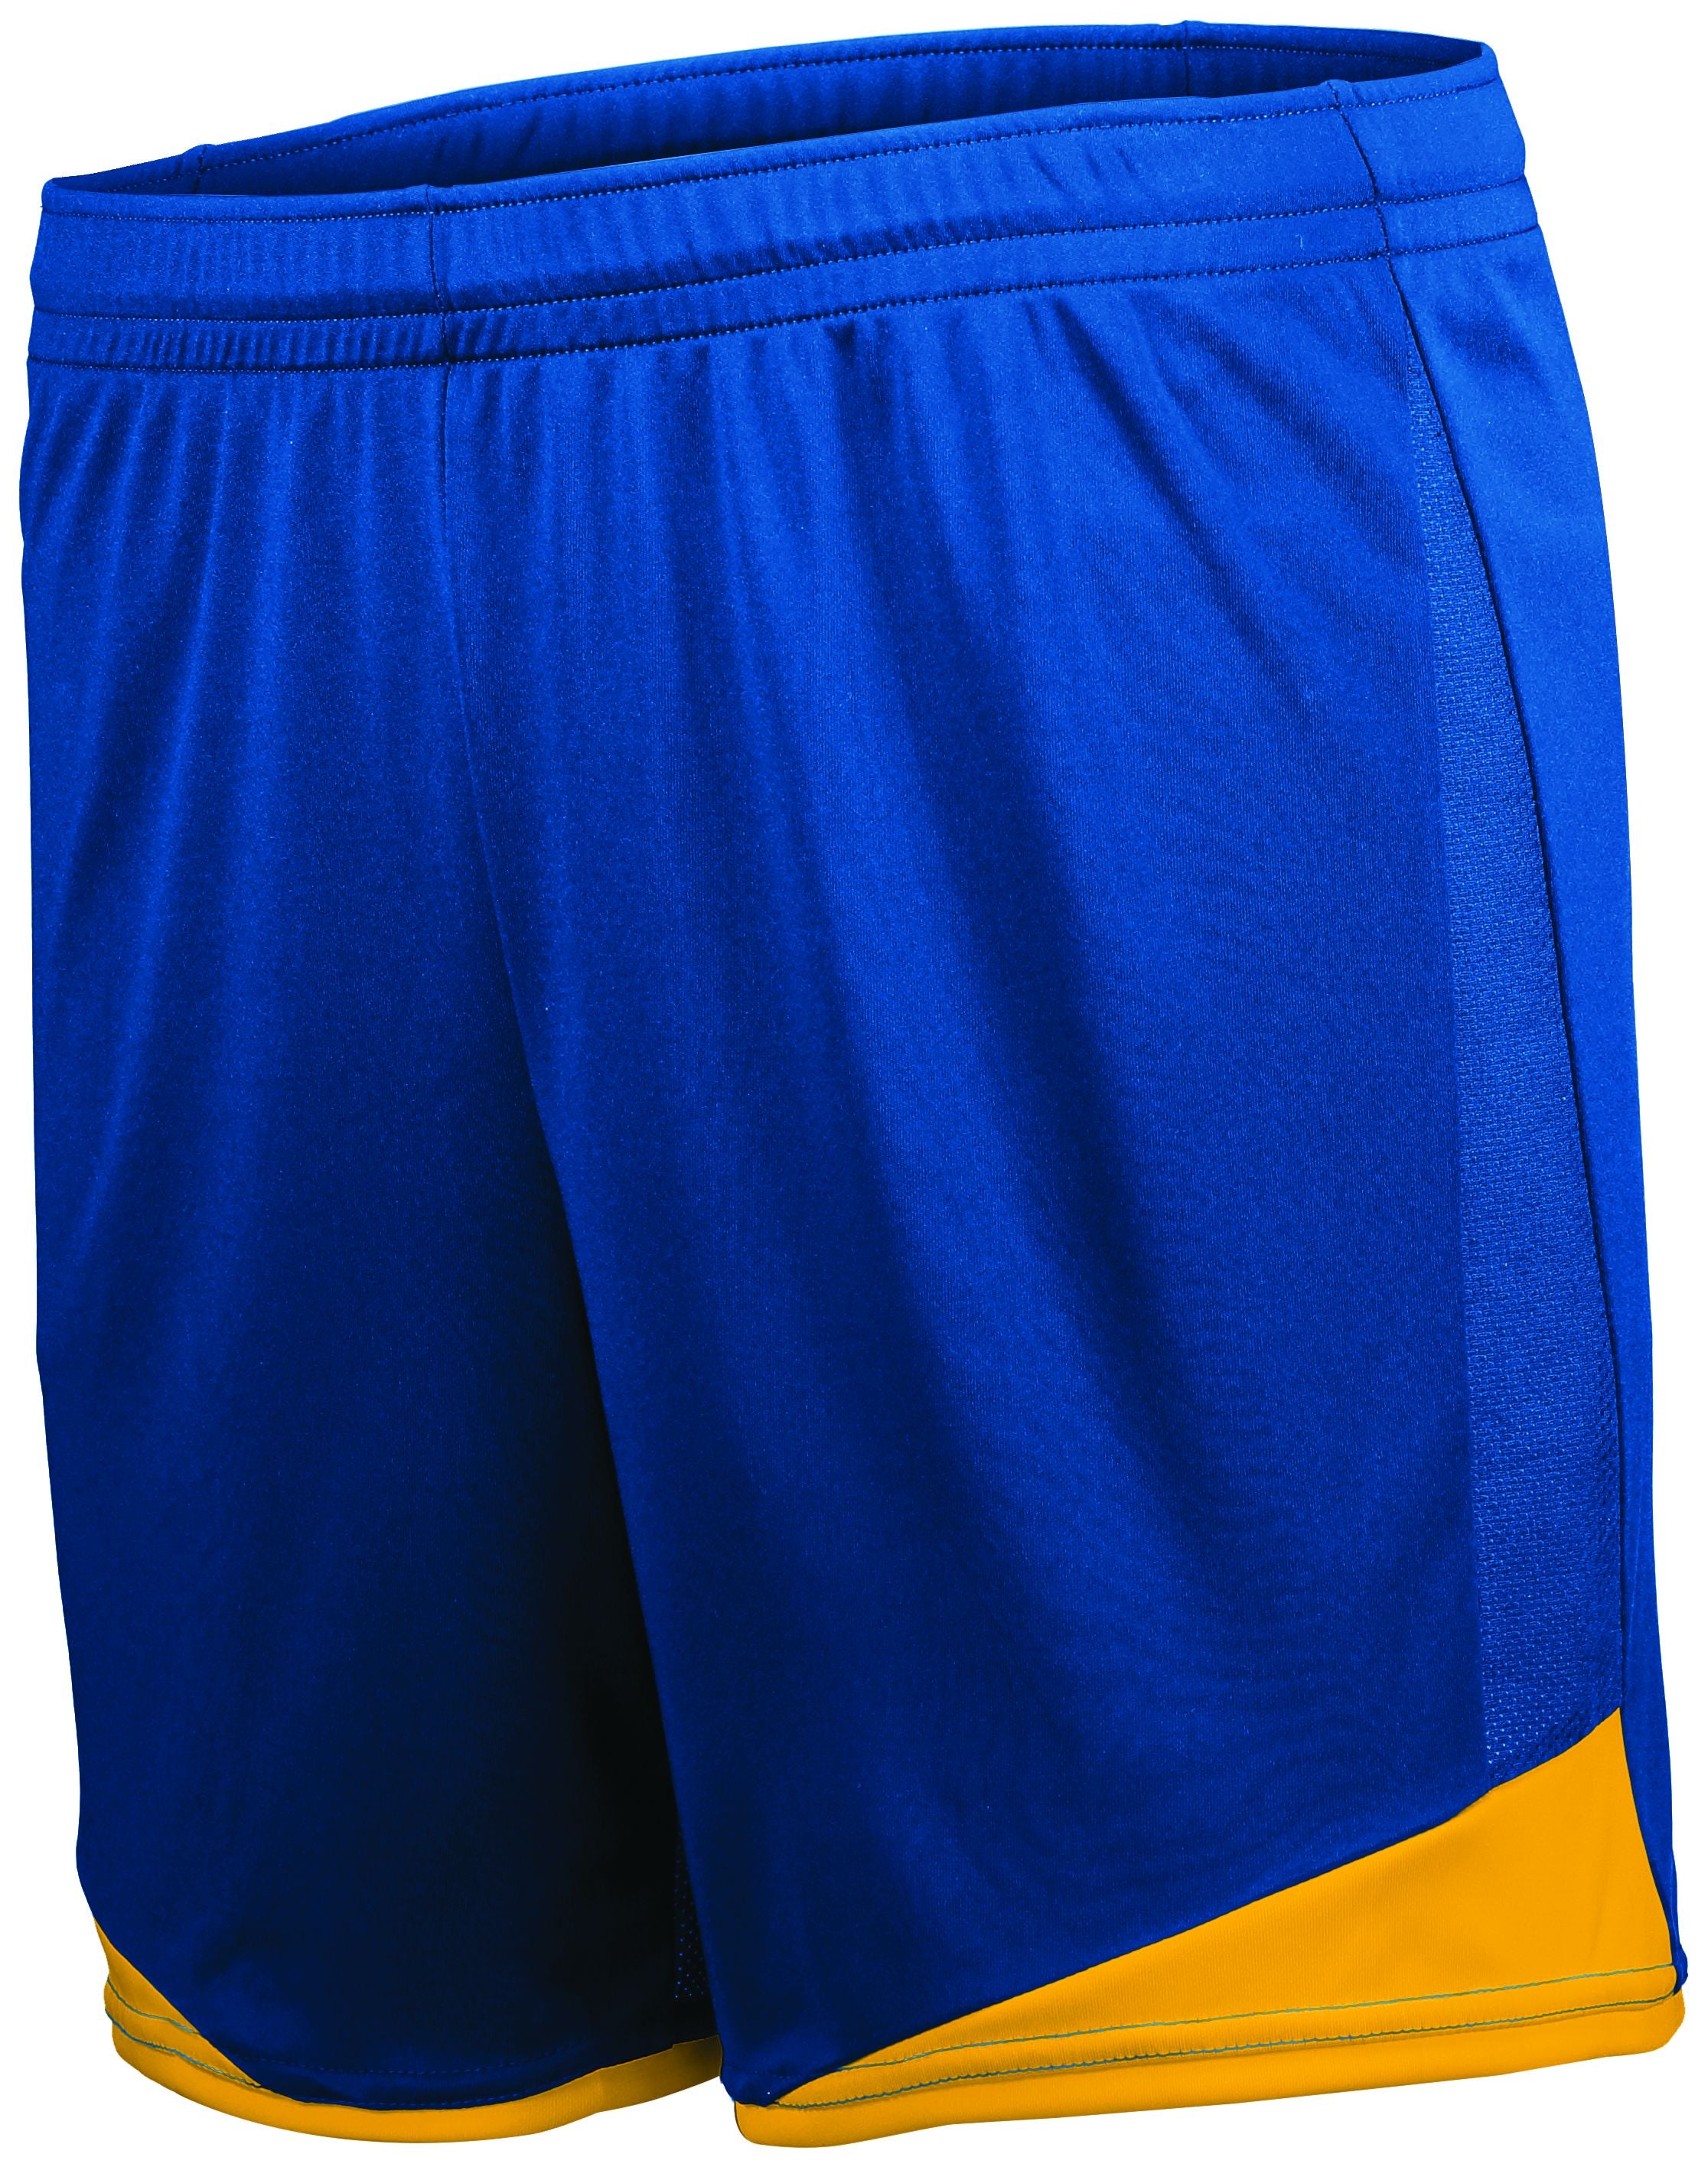 High 5 Ladies Stamford Soccer Shorts in Royal/Athletic Gold  -Part of the Ladies, Ladies-Shorts, High5-Products, Soccer, All-Sports-1 product lines at KanaleyCreations.com